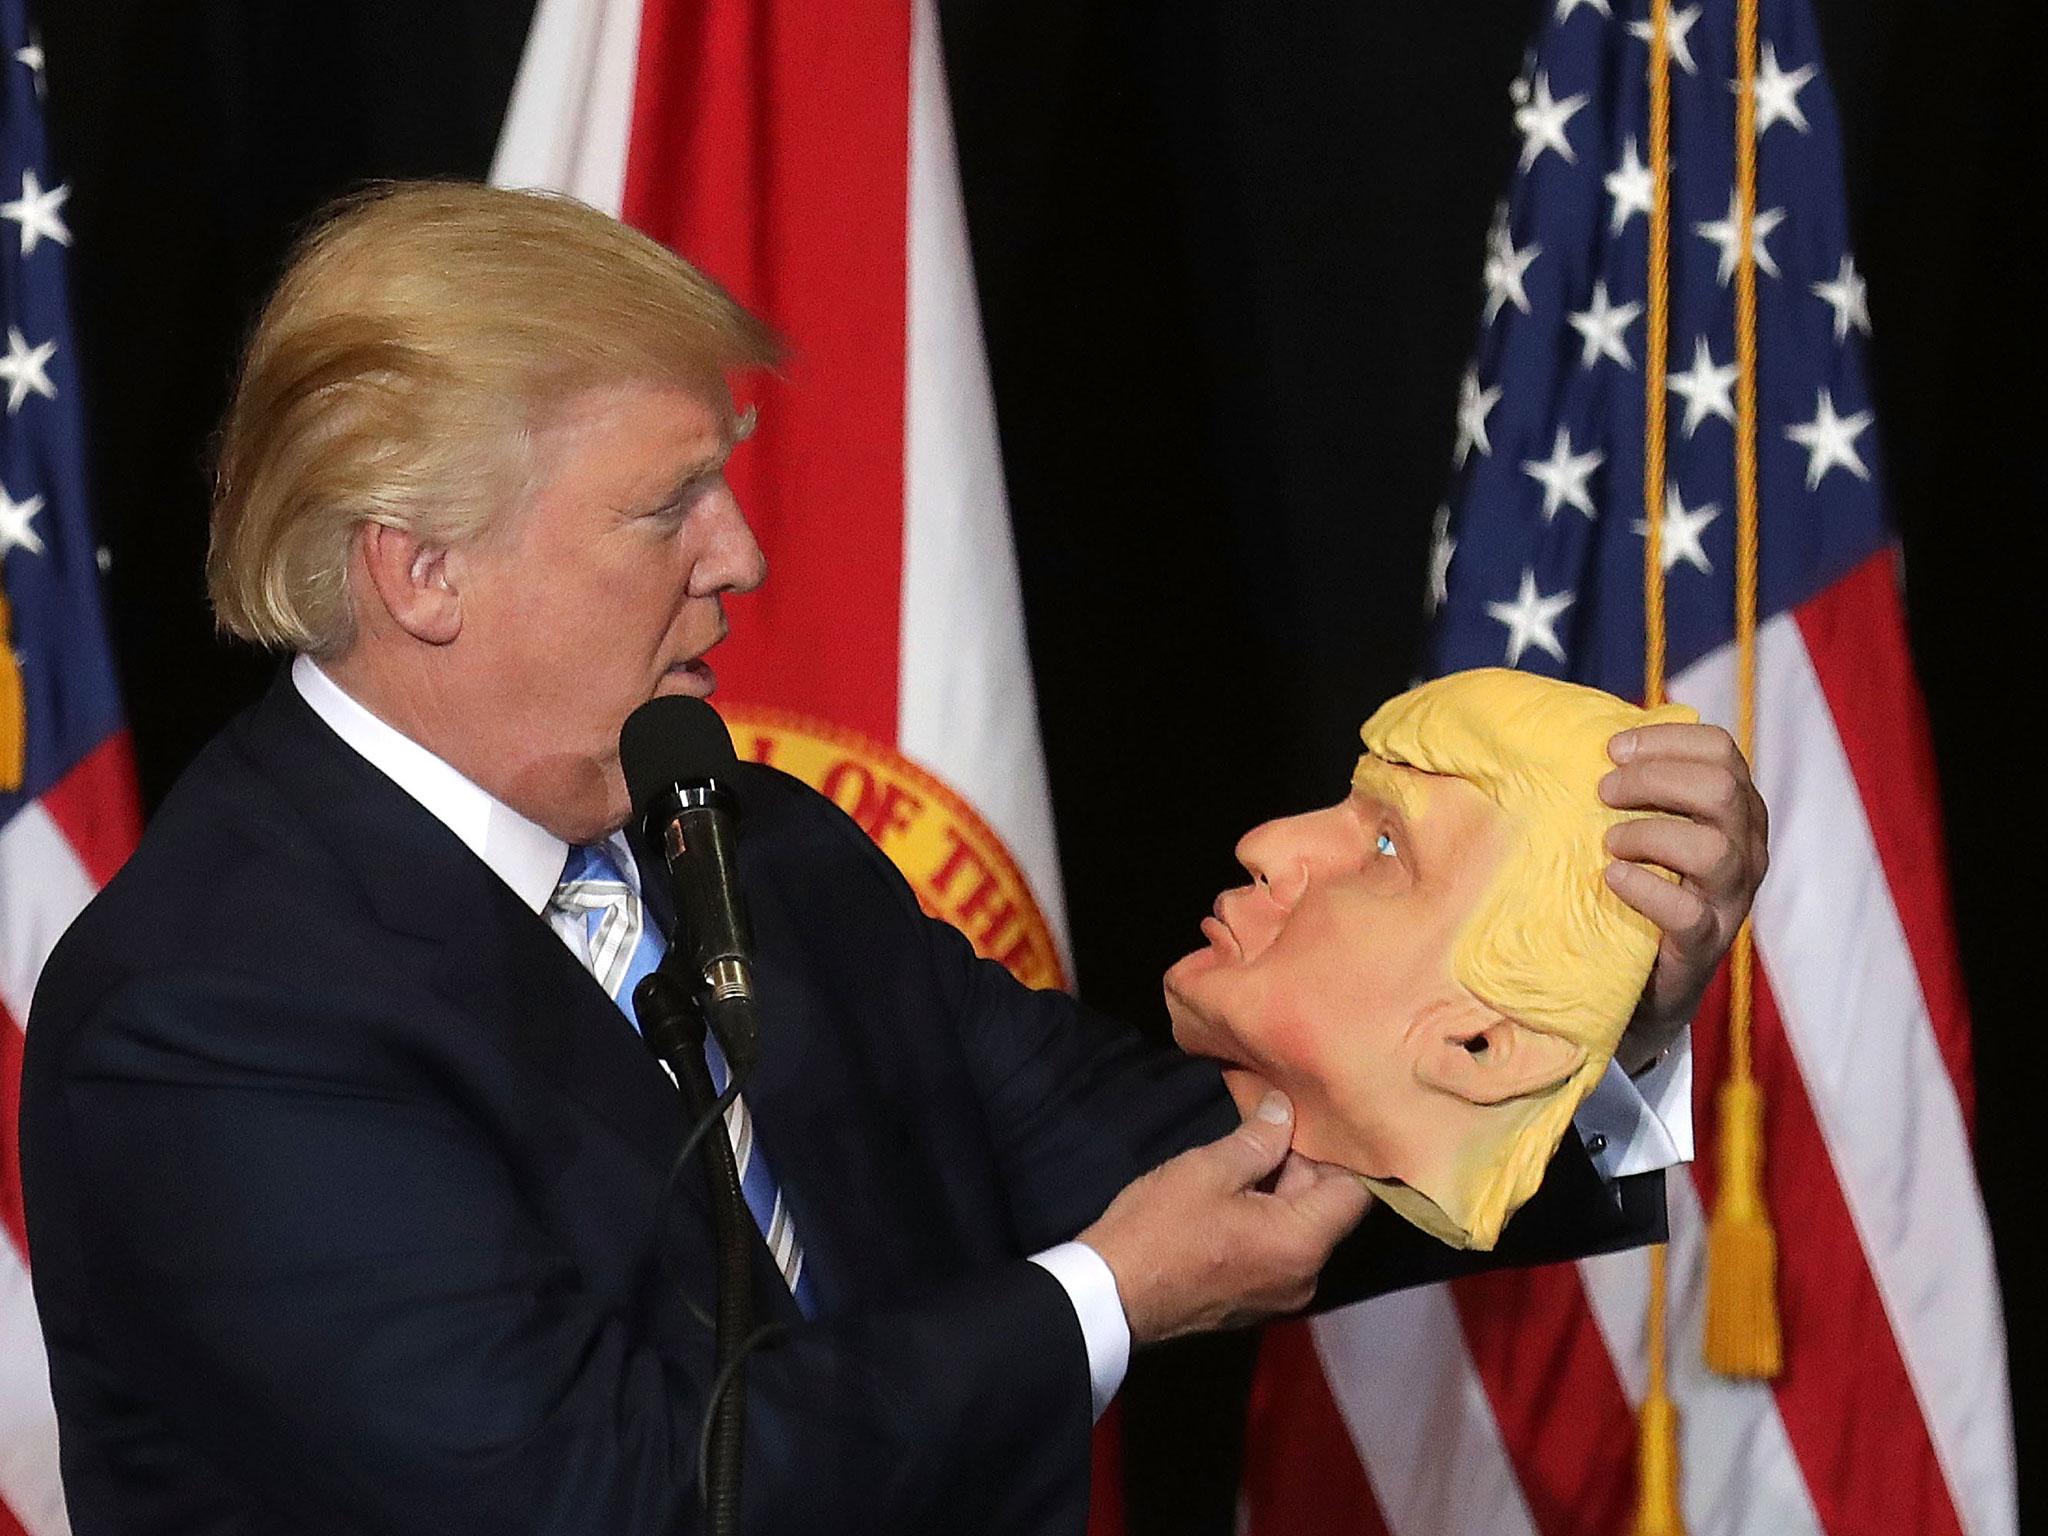 Republican presidential nominee Donald Trump holds up a rubber mask of himself during a campaign rally in the Robarts Arena at the Sarasota Fairgrounds 7 November, 2016 in Sarasota, Florida